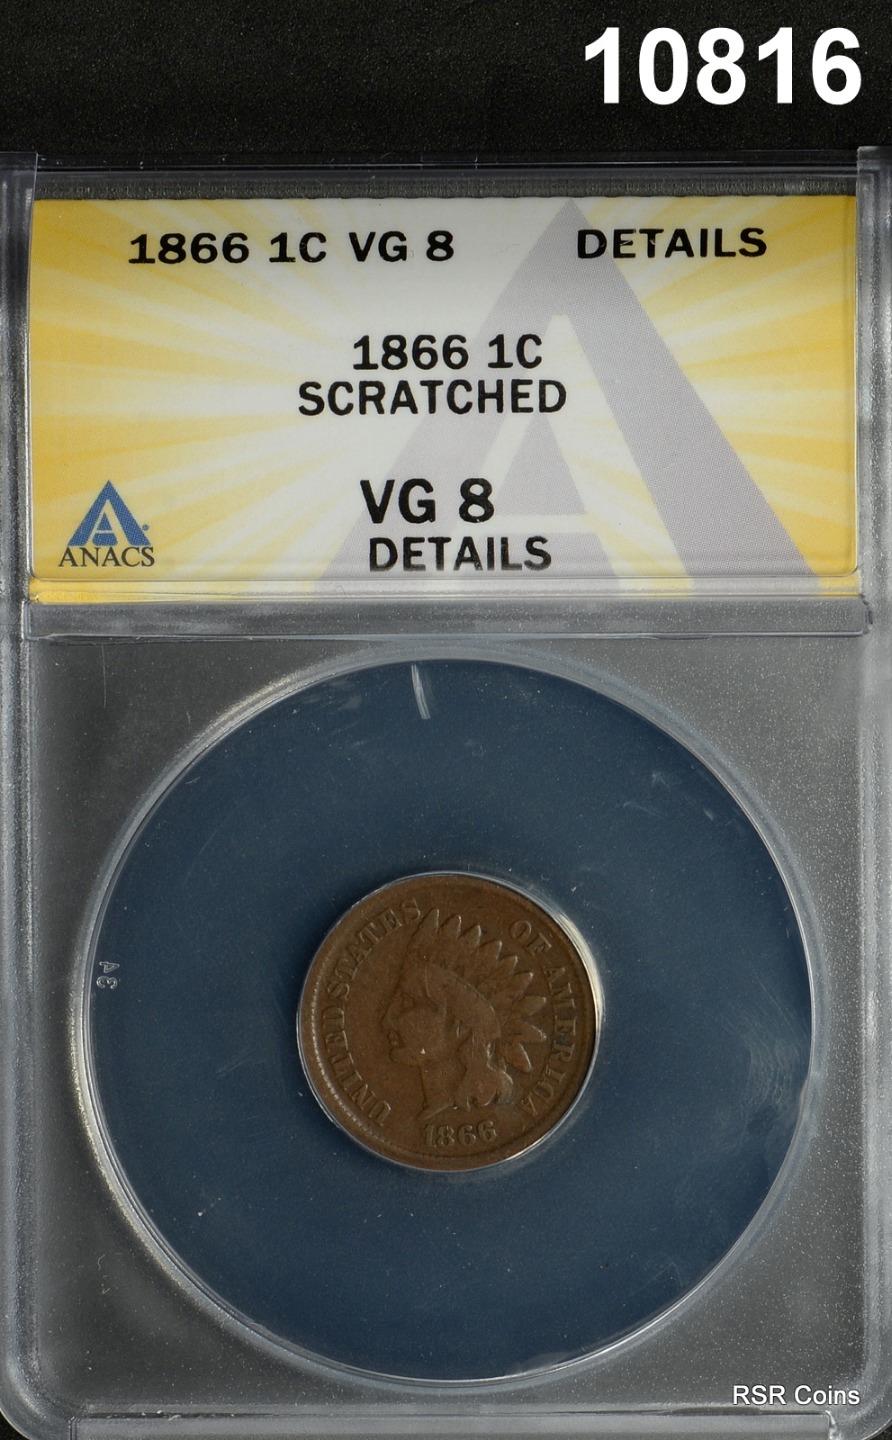 1866 INDIAN HEAD CENT ANACS CERTIFIED VG8 SCRATCHED SCRCE DATE! #10816